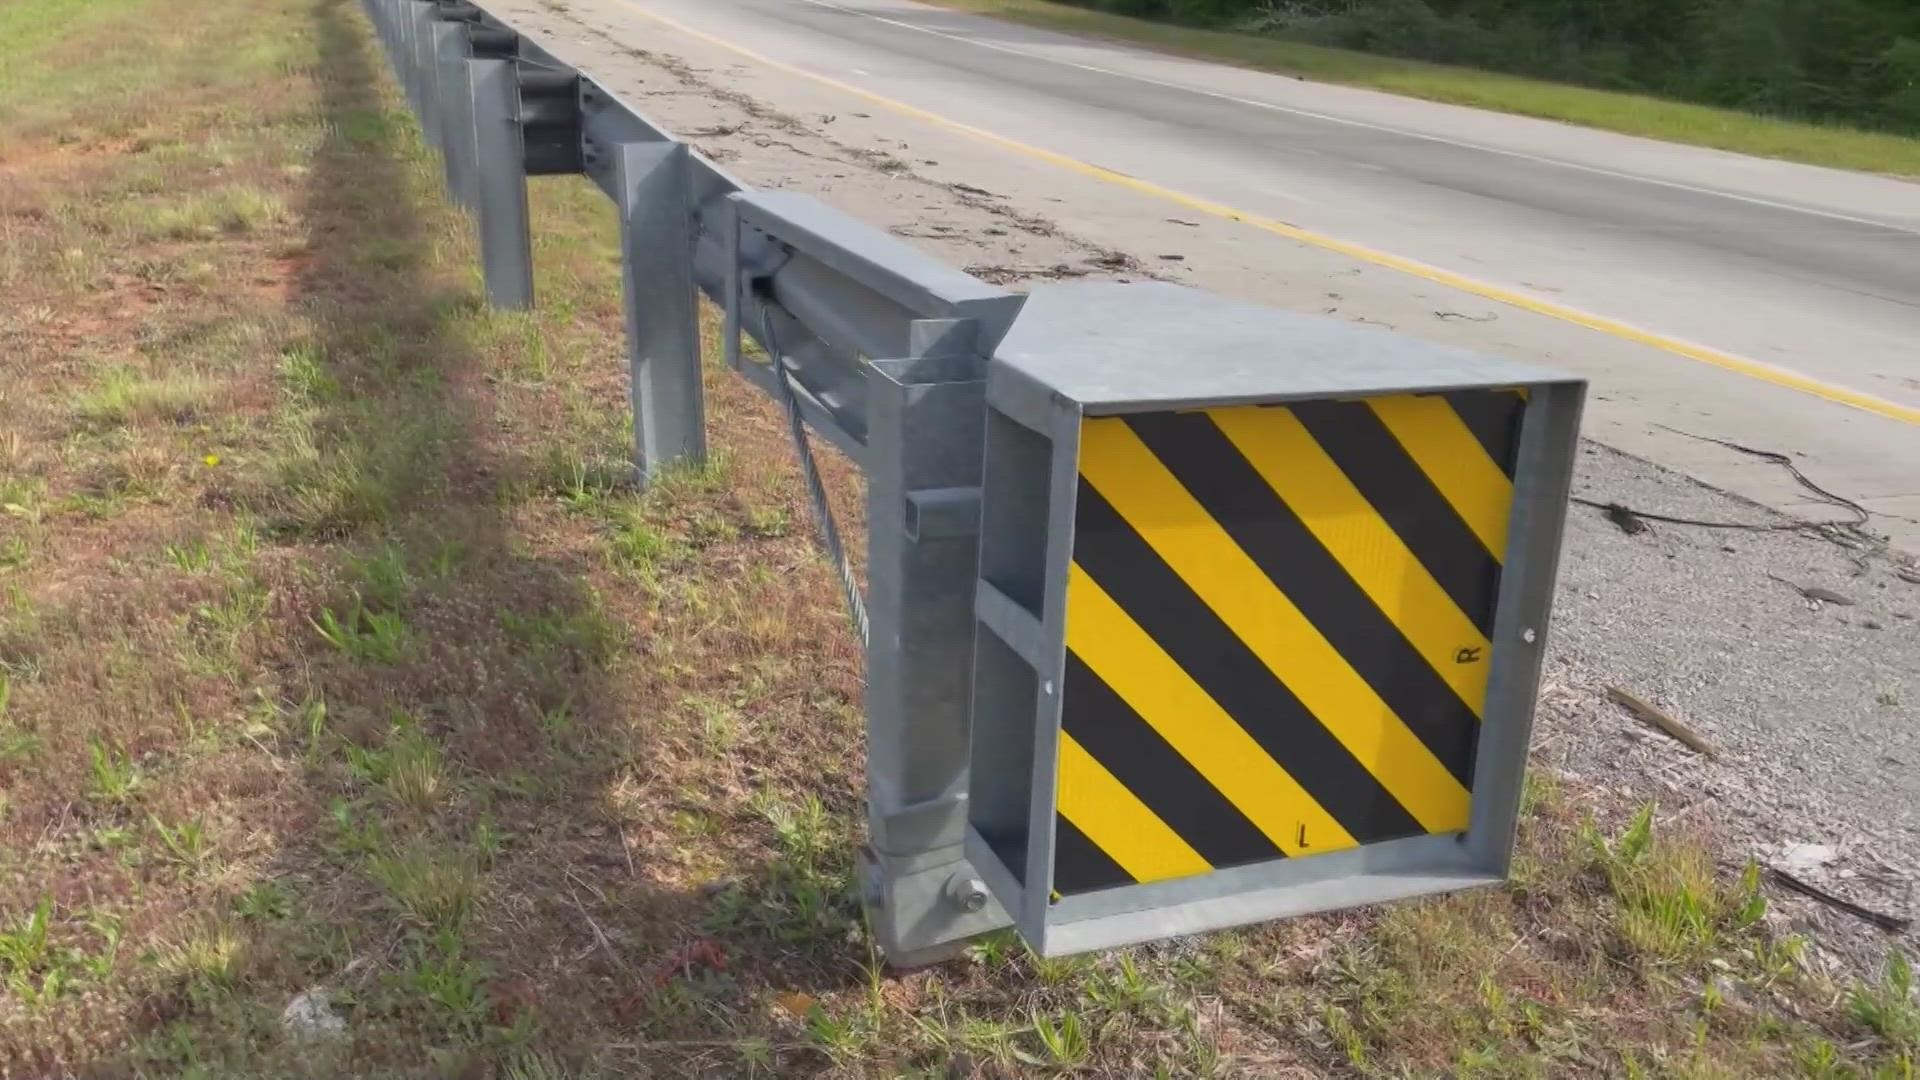 The X-Lite guardrail is named in multiple nationwide wrongful death lawsuits, which claim the devices spear cars on impact, killing drivers.